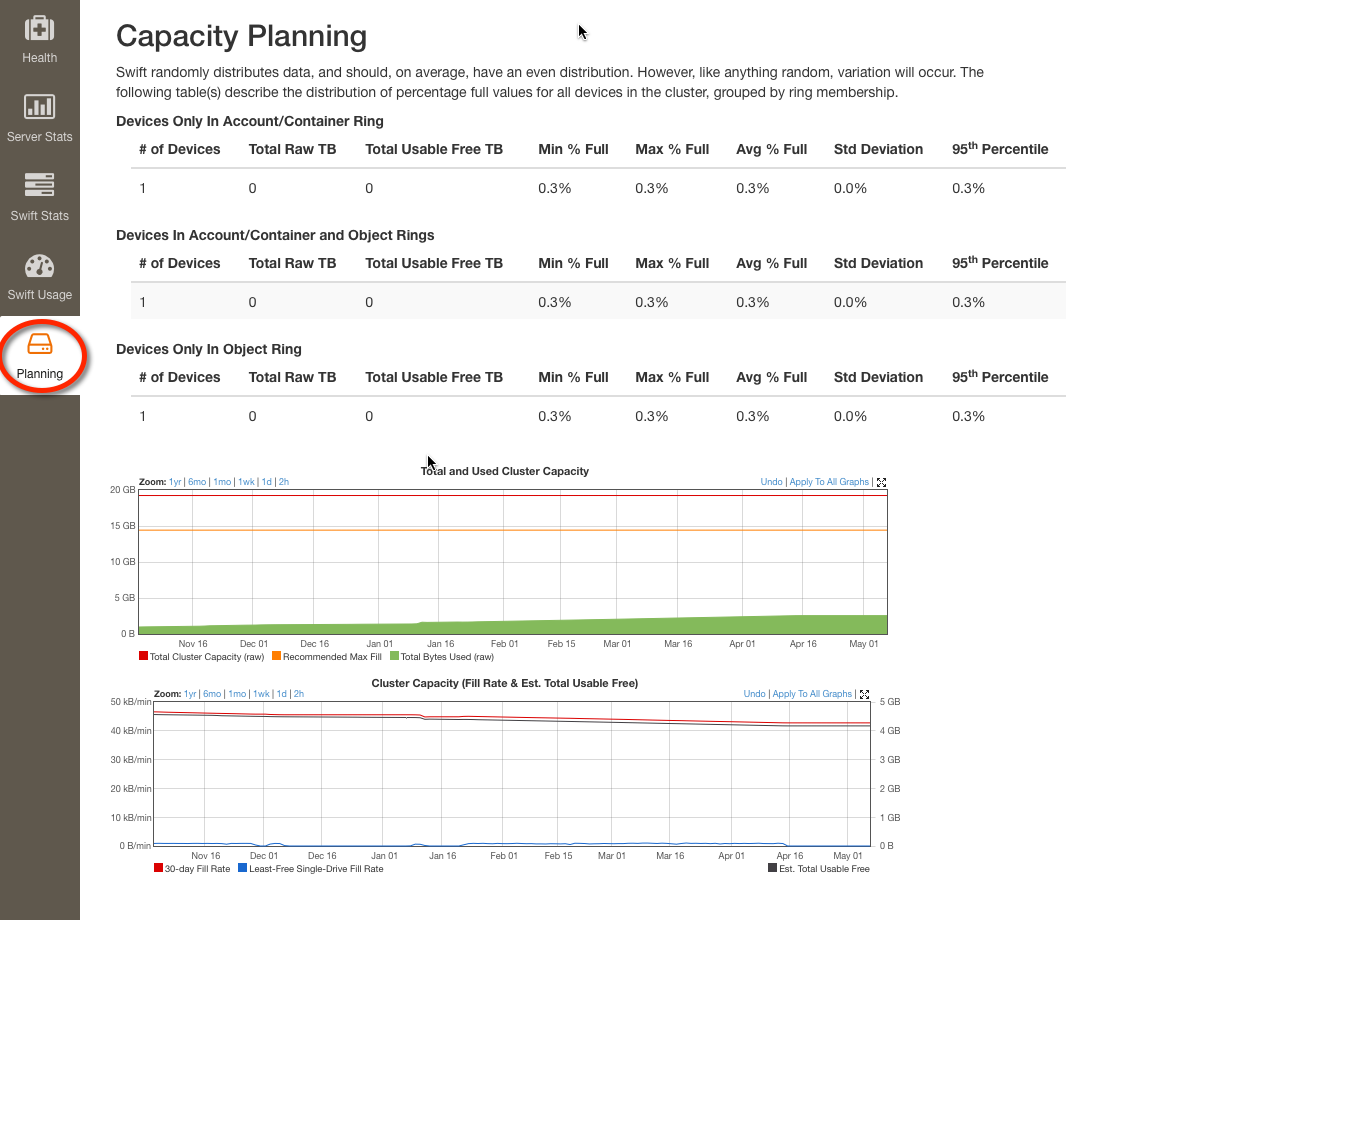 ../../_images/capacity-planning.png